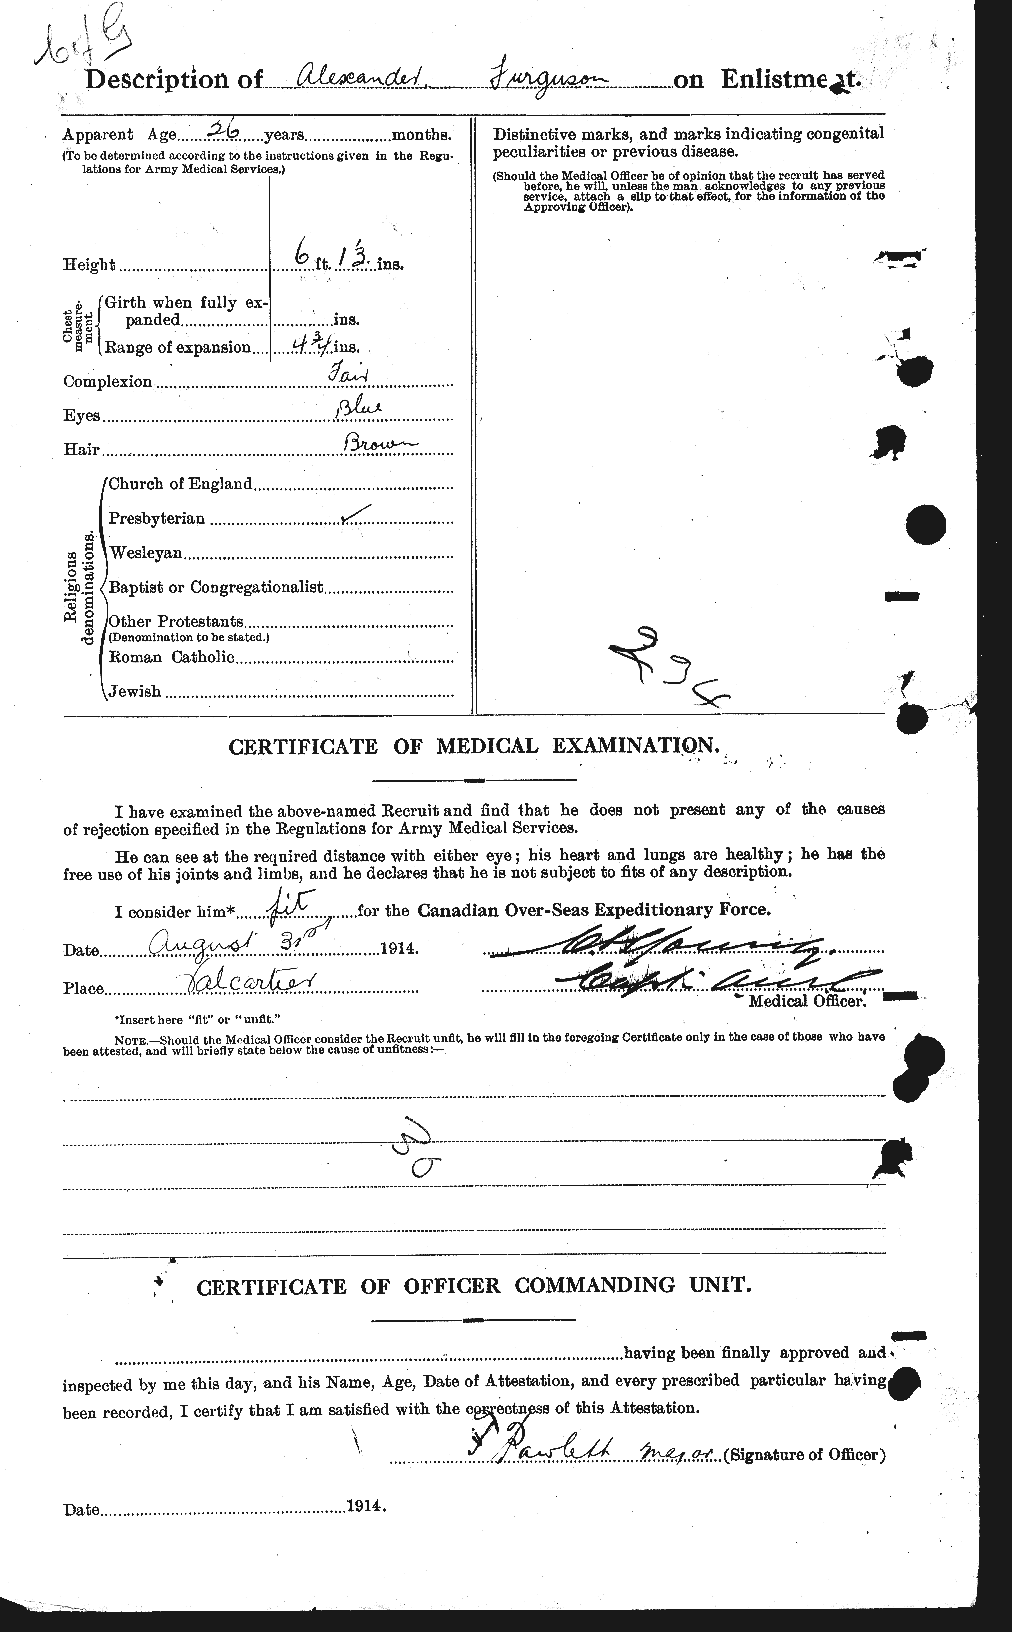 Personnel Records of the First World War - CEF 318844b